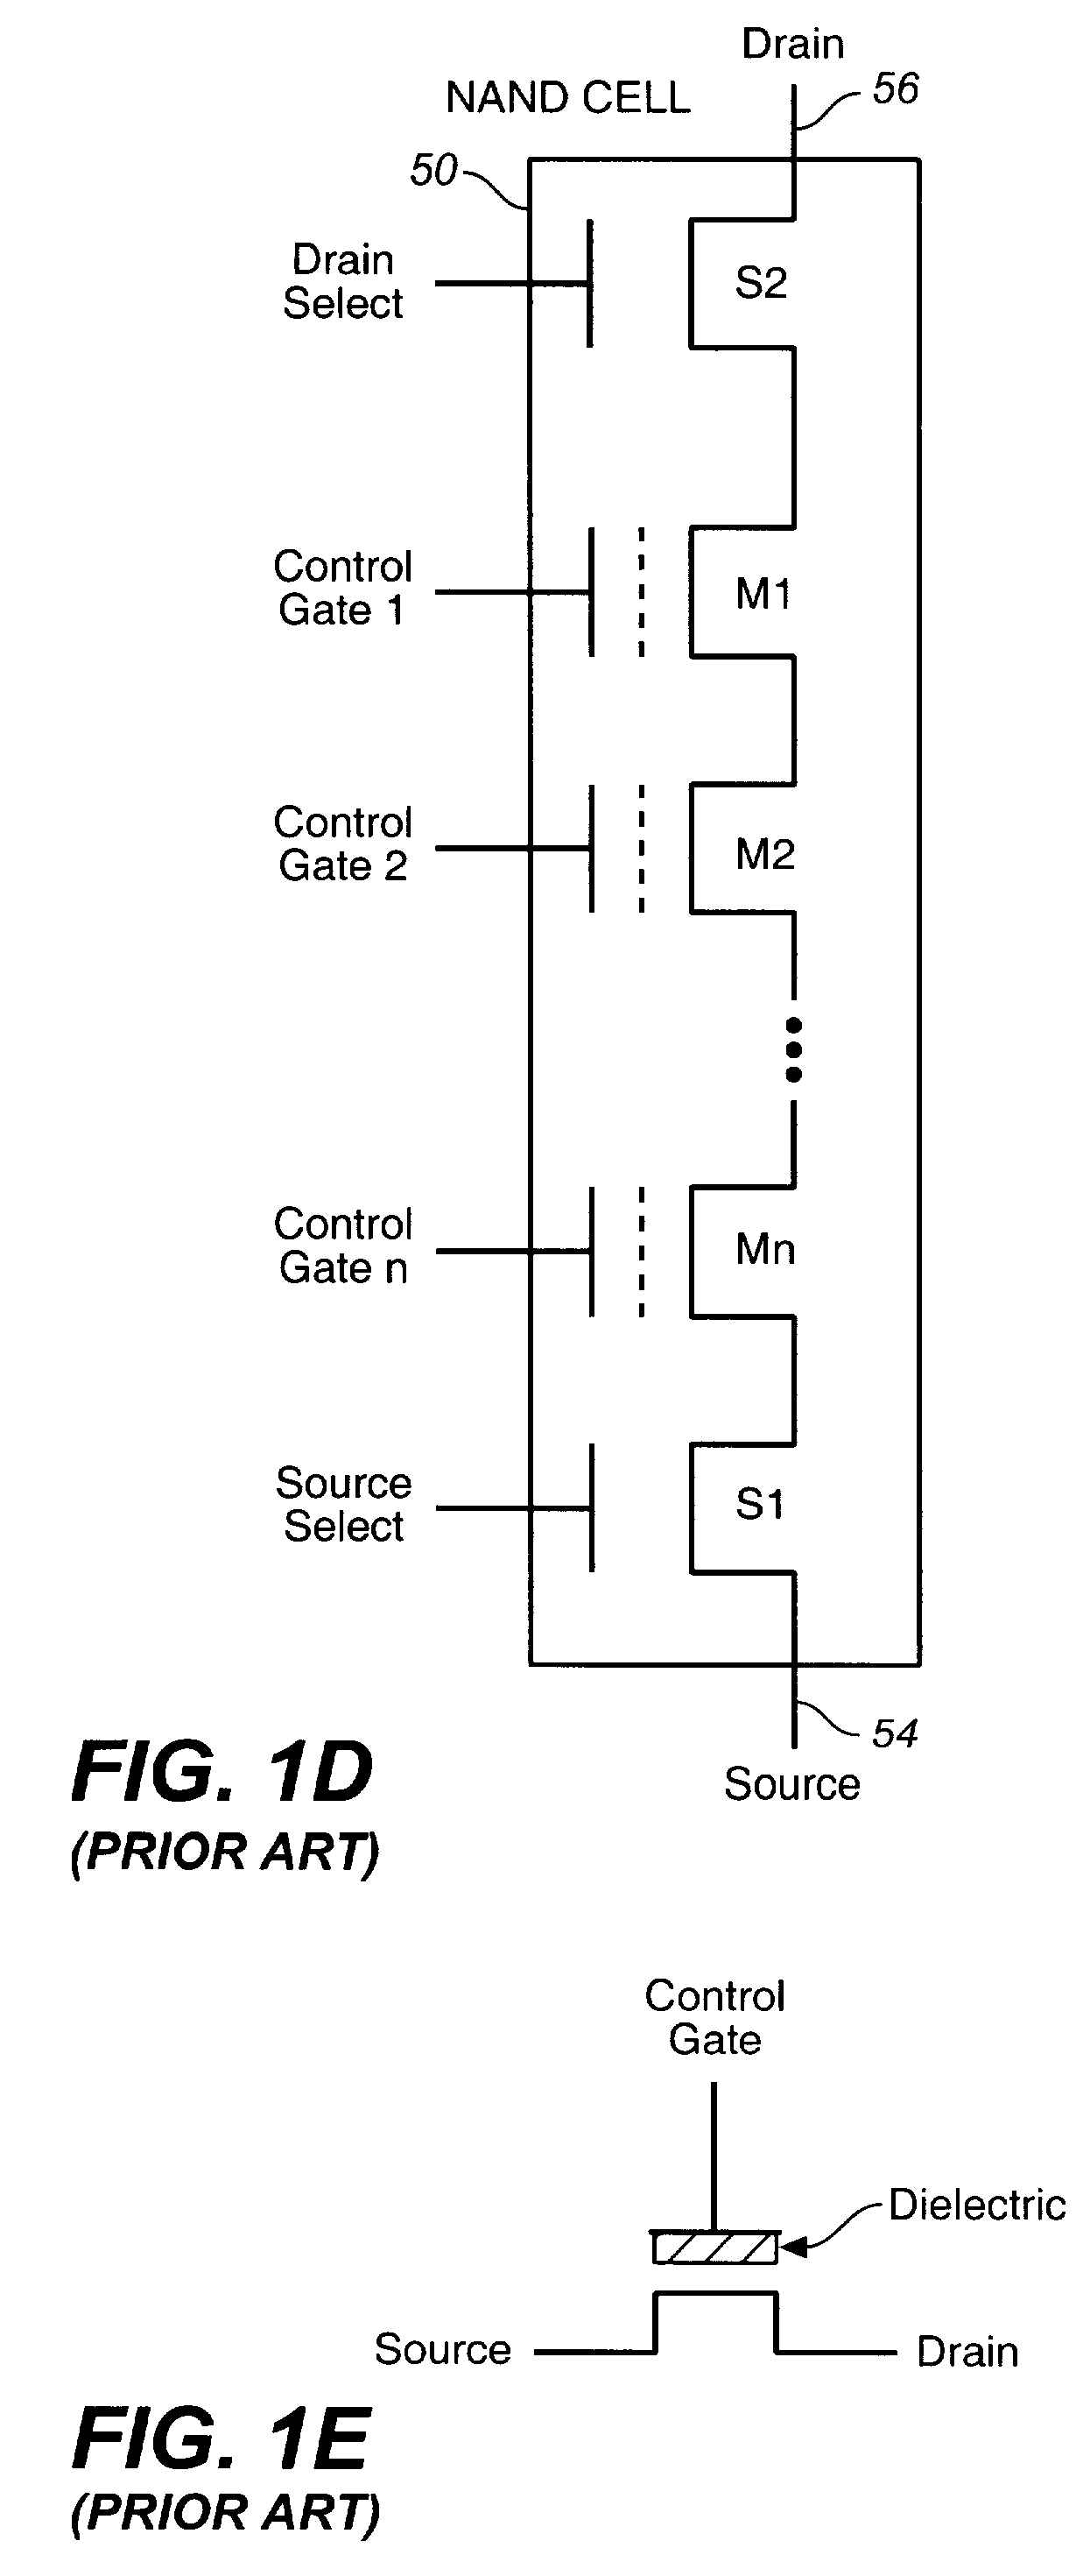 Use of data latches in cache operations of non-volatile memories